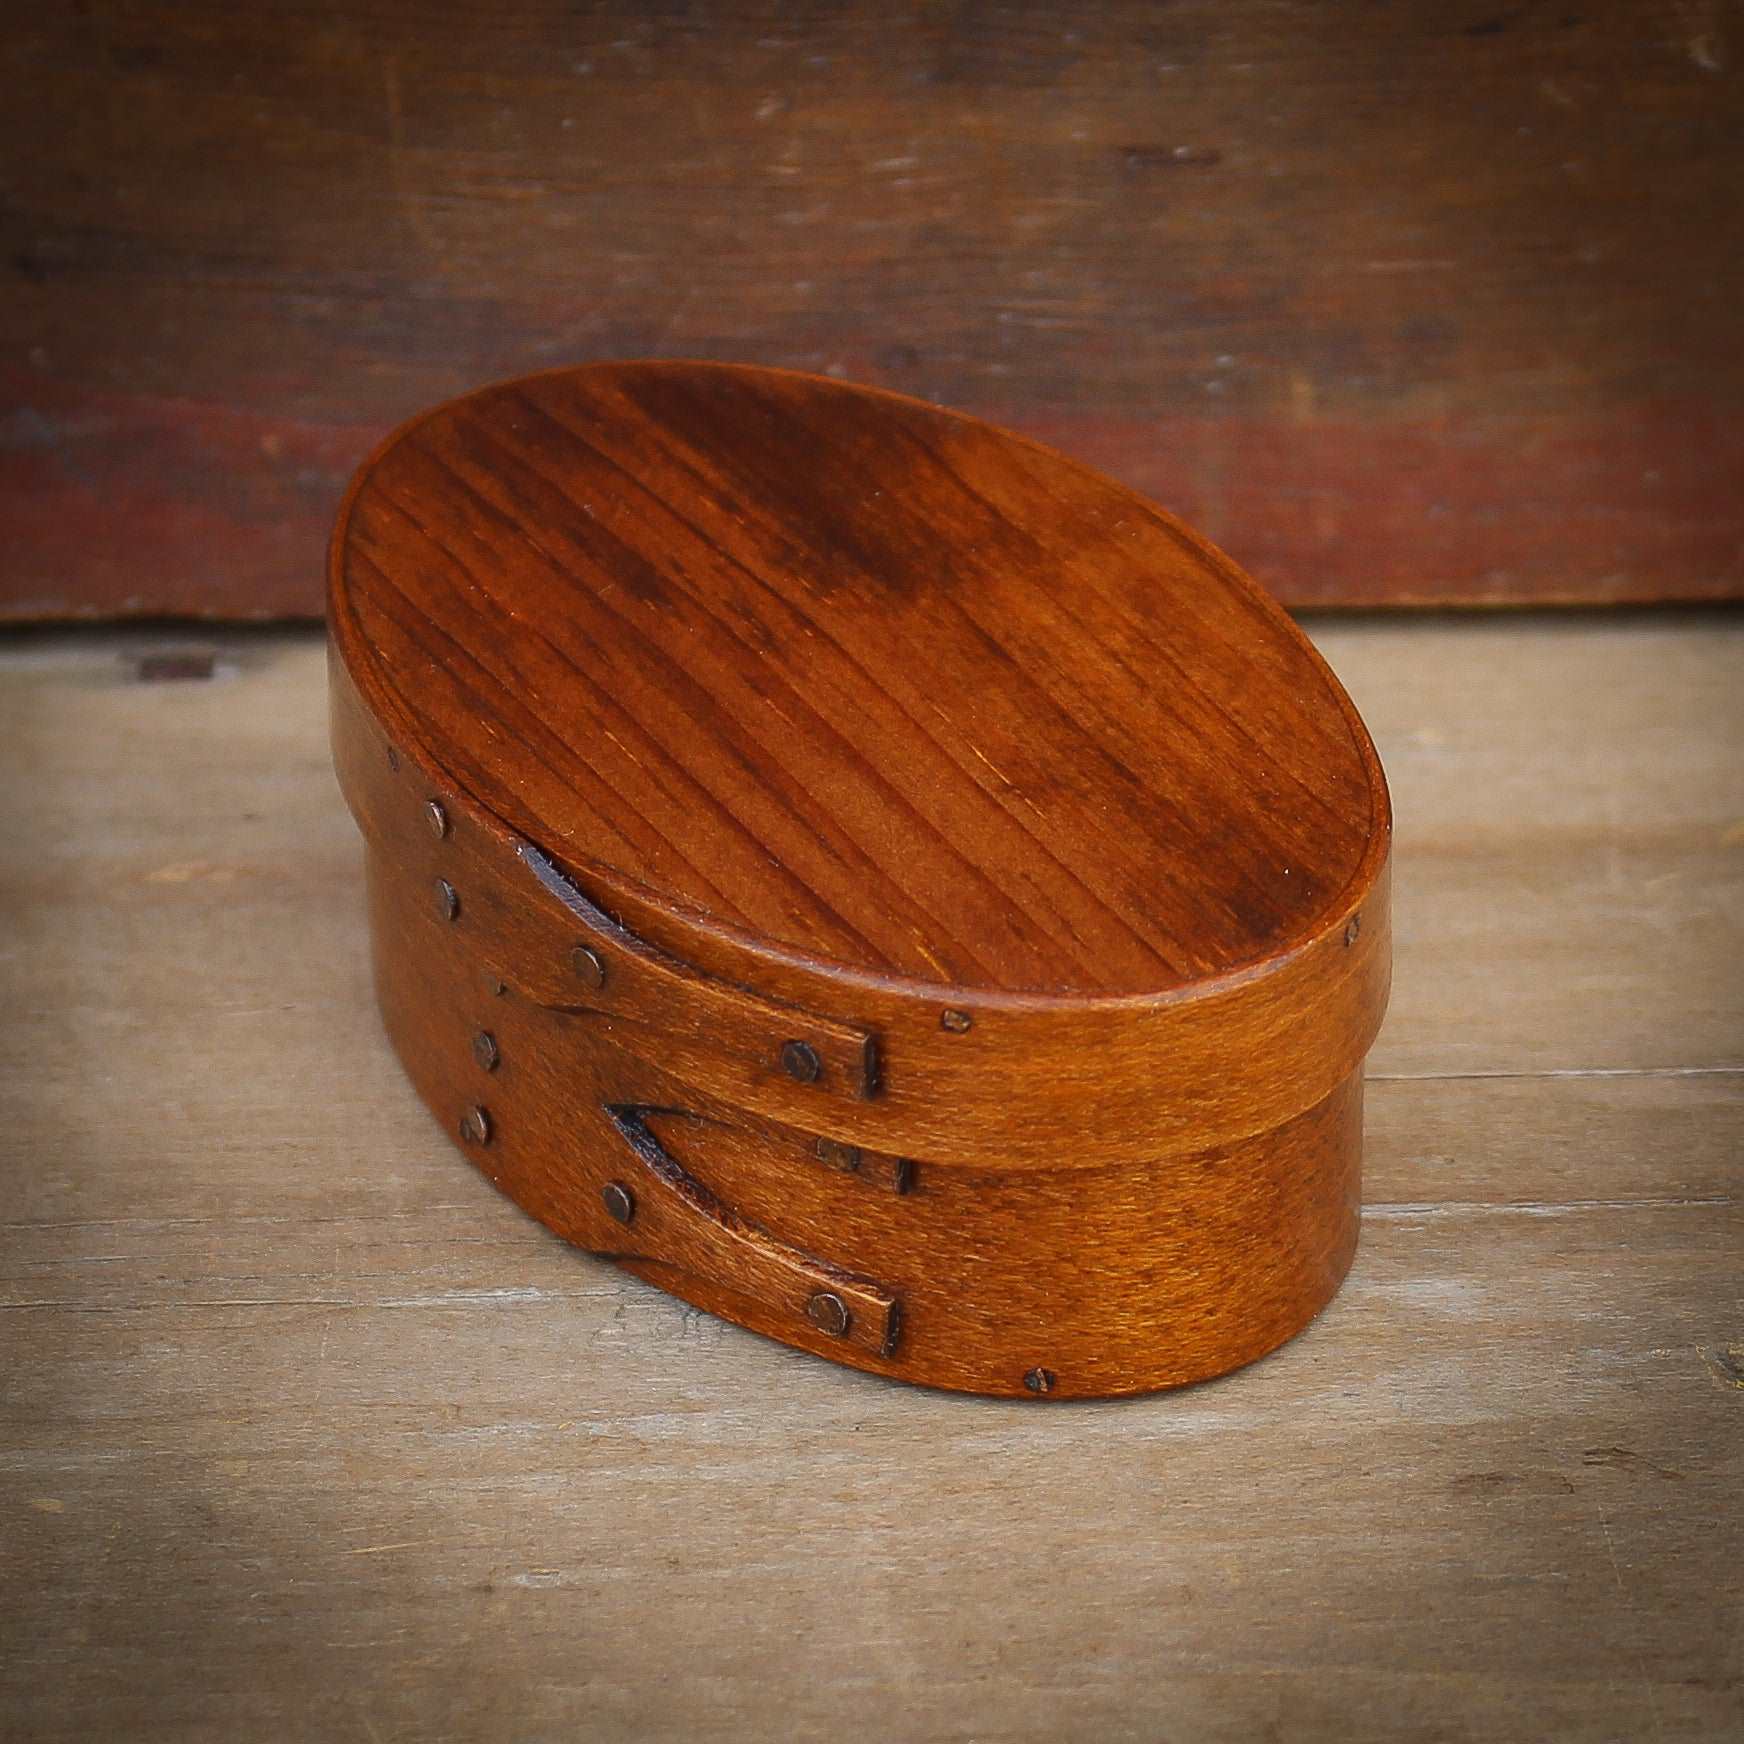 Shaker Oval Box, Size #0, LeHays Shaker Boxes, Handcrafted in Maine.  Antiqued Natural Finish, Side View